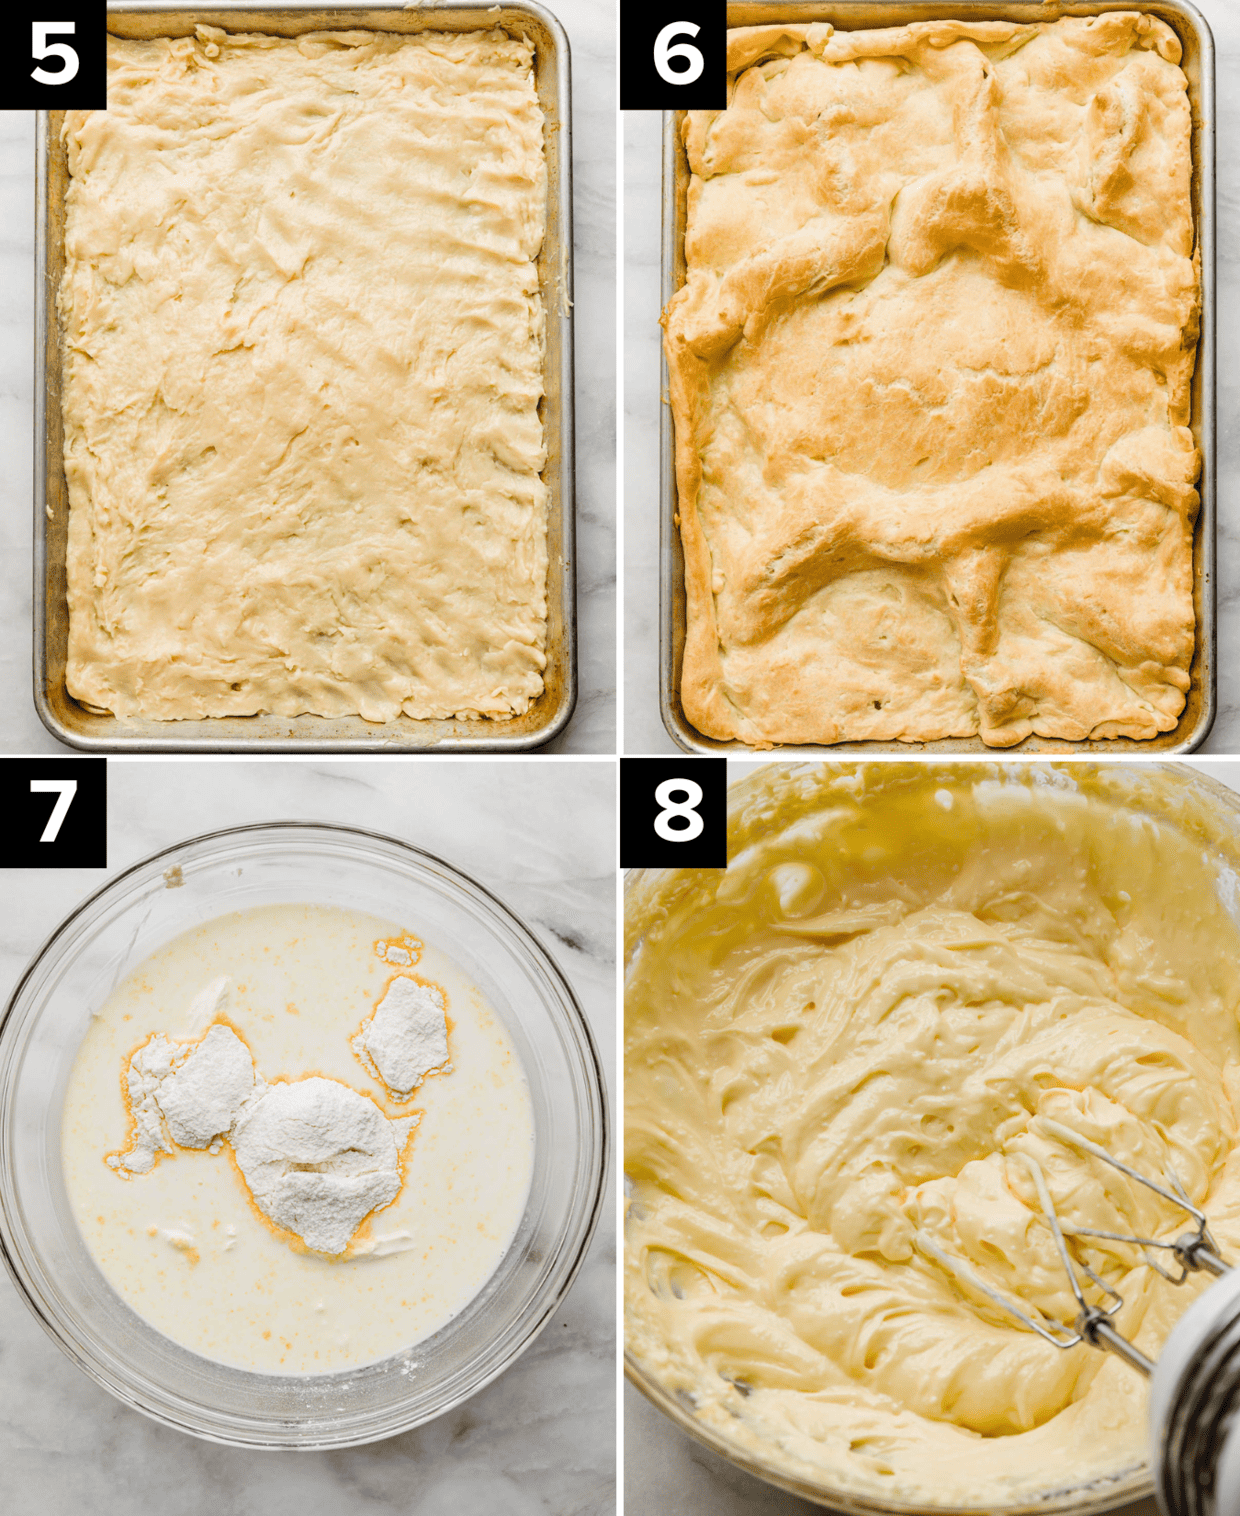 Four photos top left is cream puff batter in a jelly roll pan, top right photo is baked cream puff cake baked in a pan, bottom left is milk and instant vanilla pudding mixture in a bowl, bottom right is instant vanilla pudding and cream cheese mixture in a glass bowl.